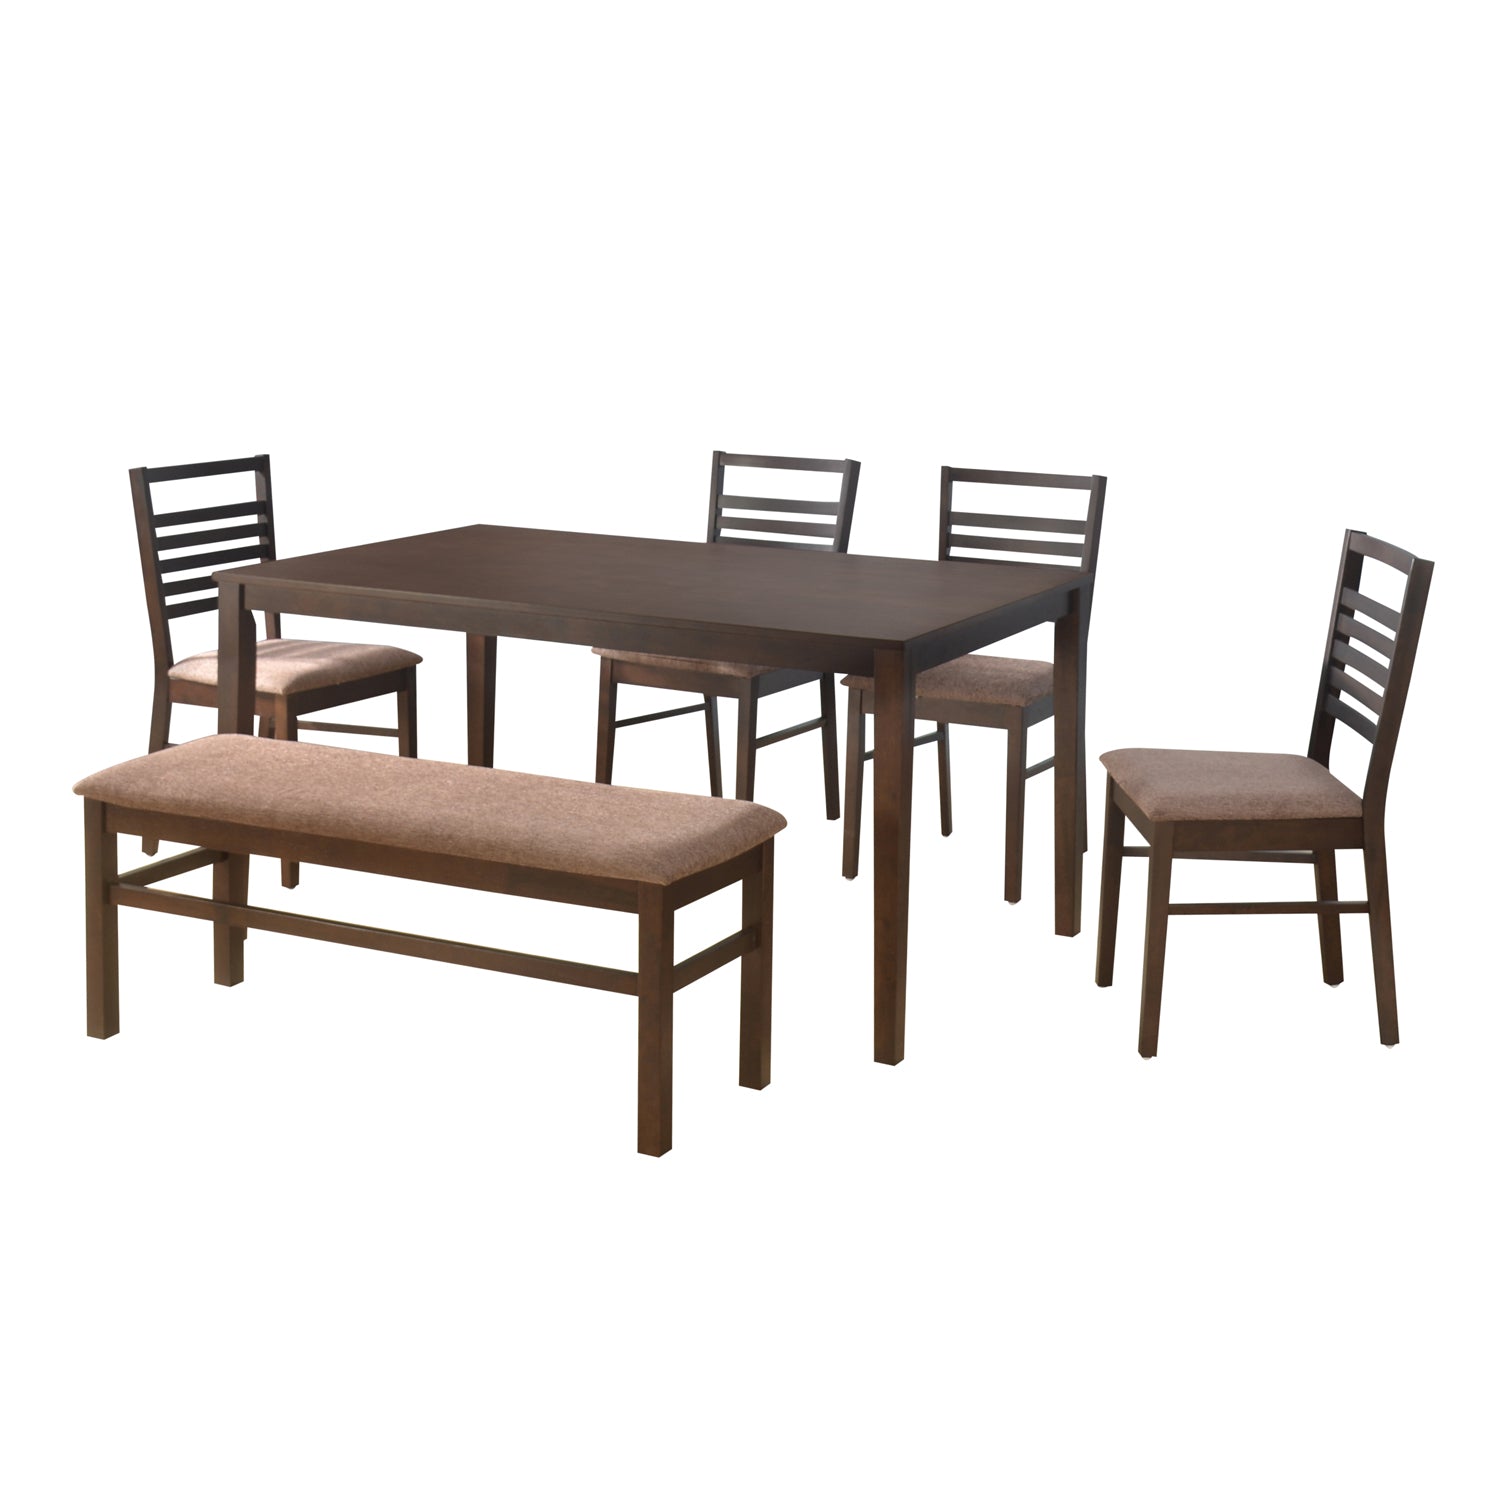 Gem 6 Seater Dining Set With Bench (Cappuccino)